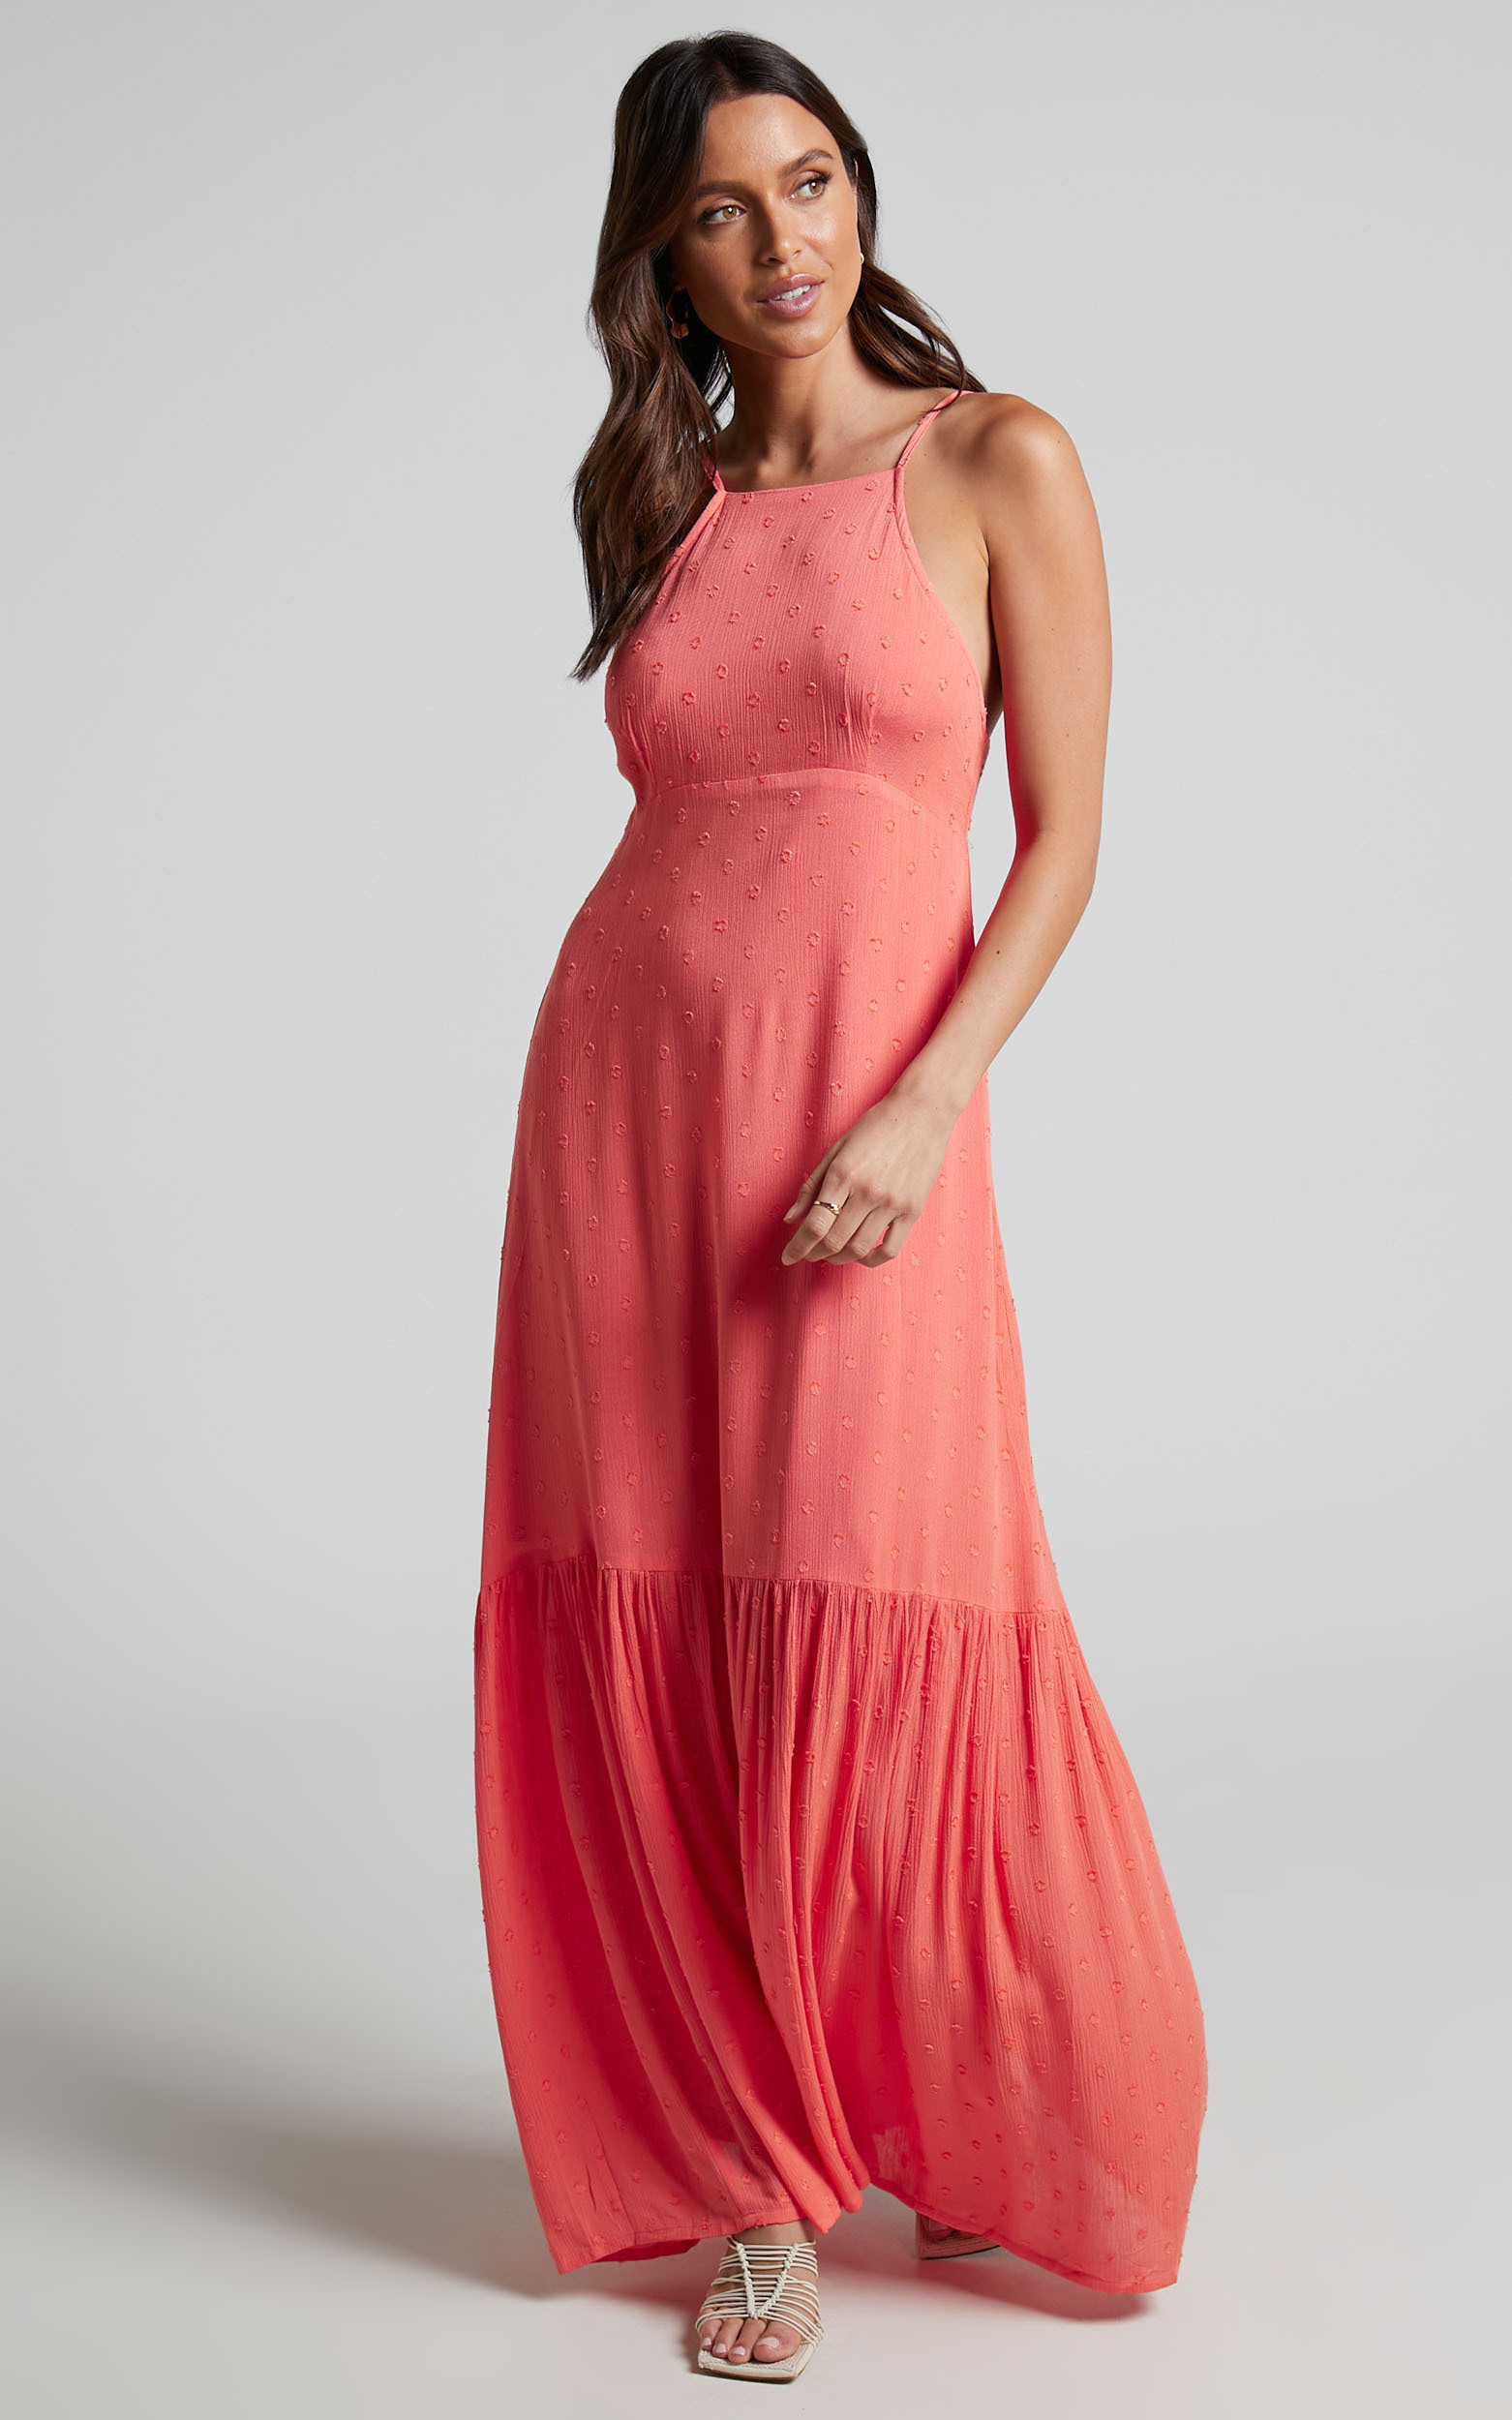 Cariele Strappy Tiered Dotted Maxi Dress in Coral - 06, PNK2, hi-res image number null